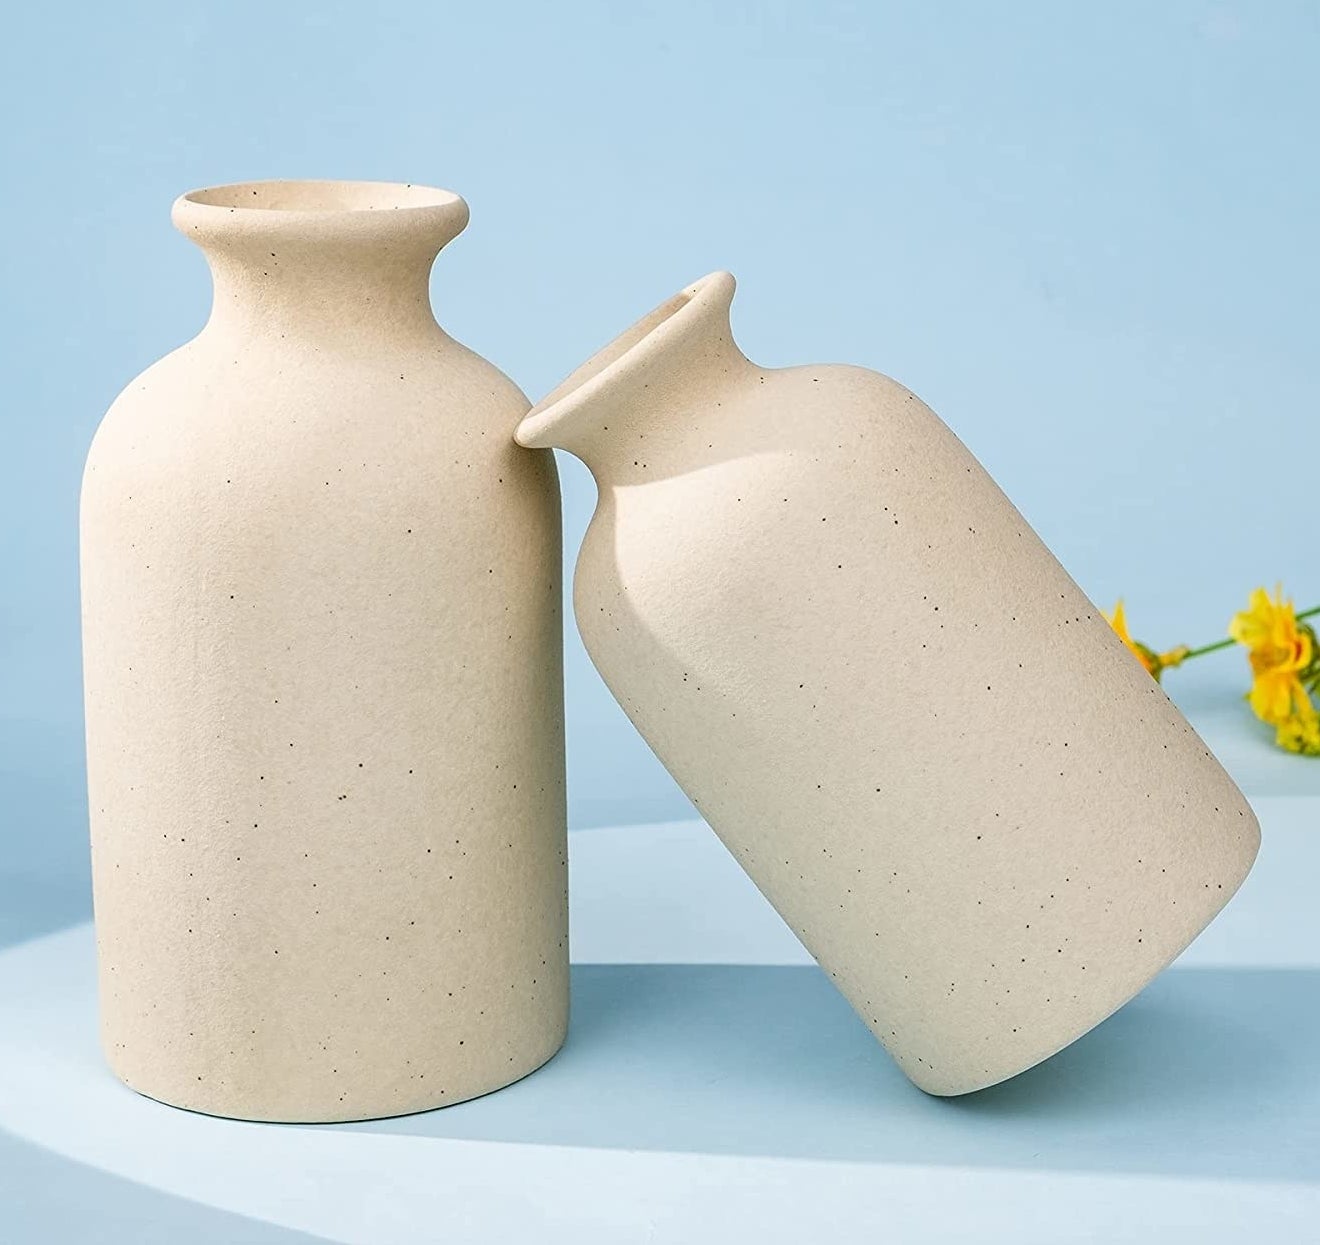 the two vases, one leaning on the other